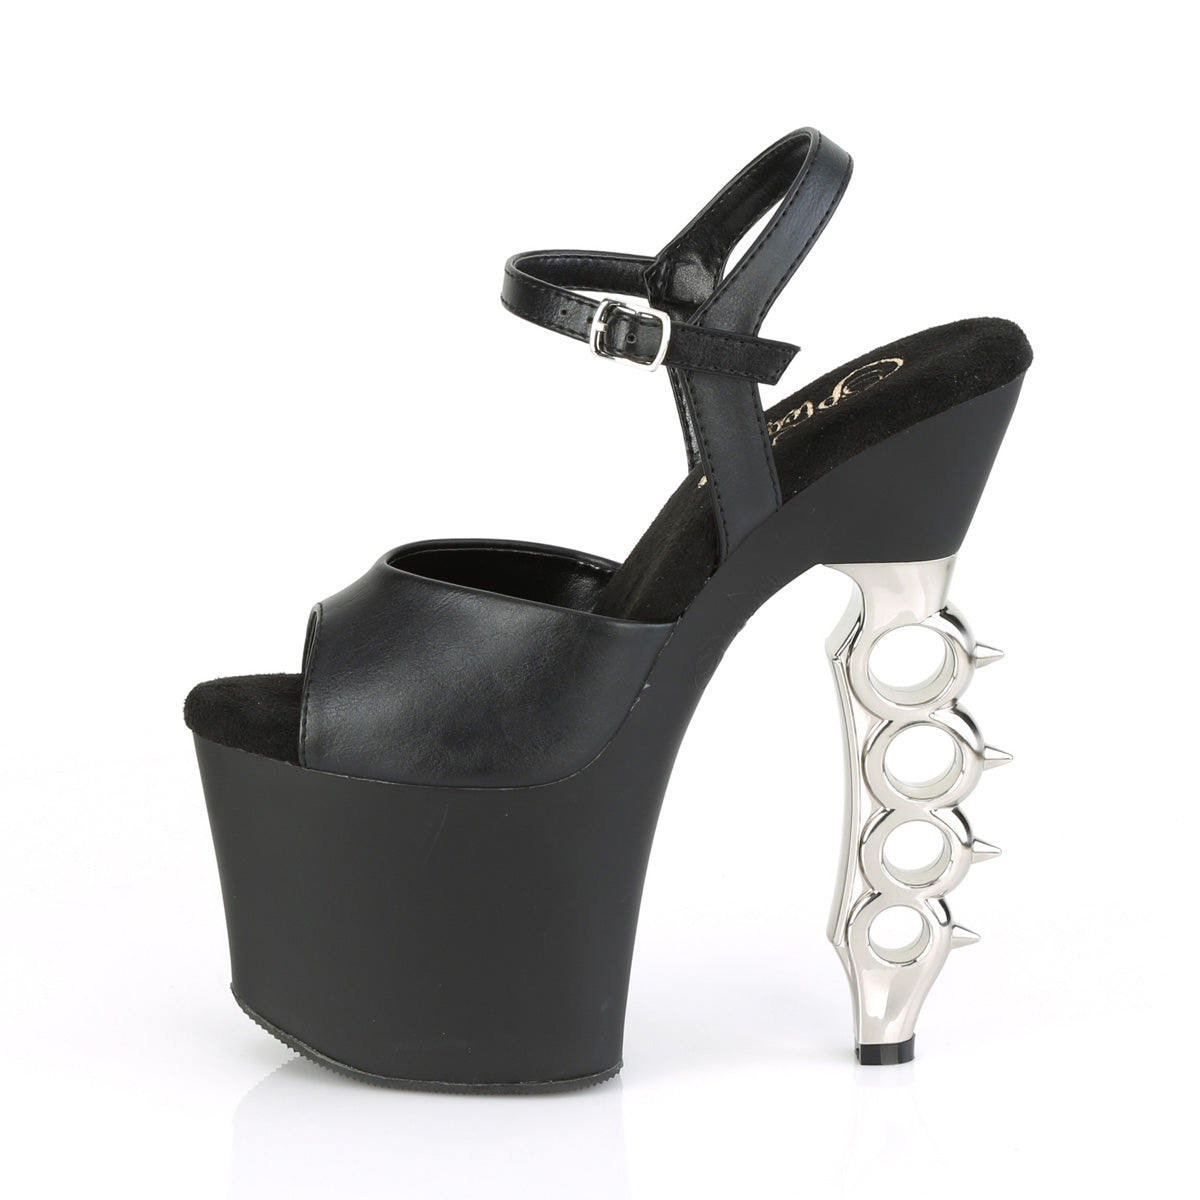 IRONGRIP-709 Pleaser Black F.Leather/Black Matte-Silver Brushed Platform Shoes [Sexy Shoes]